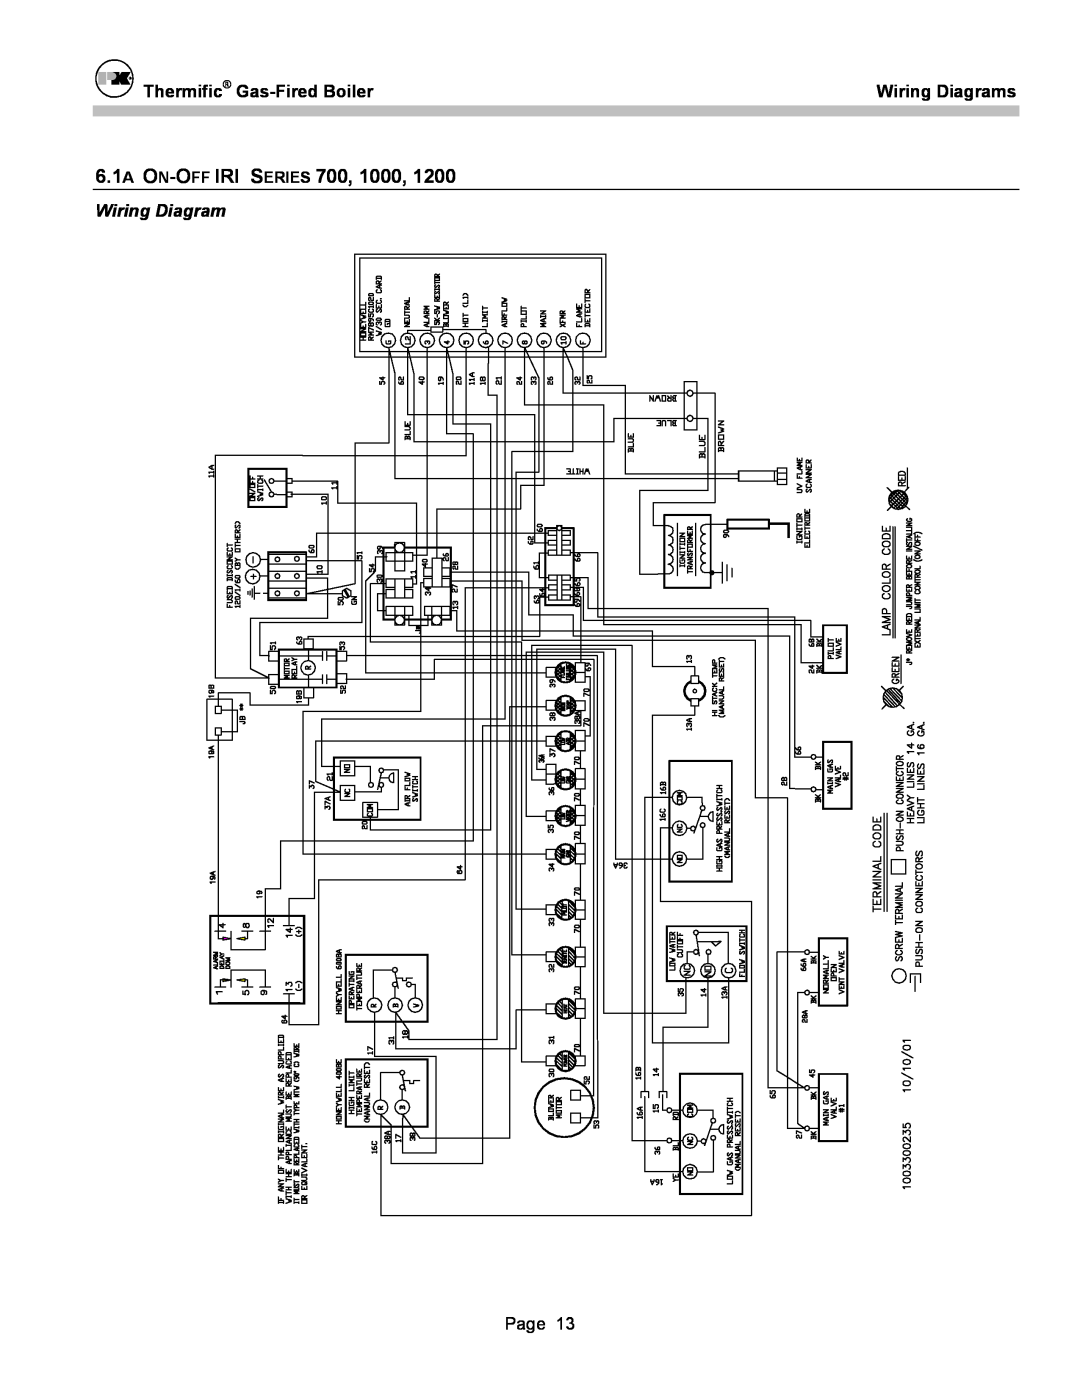 Patterson-Kelley DVSCM-02 owner manual 6.1A ON-OFF IRI SERIES, Thermific Gas-FiredBoiler, Wiring Diagrams 